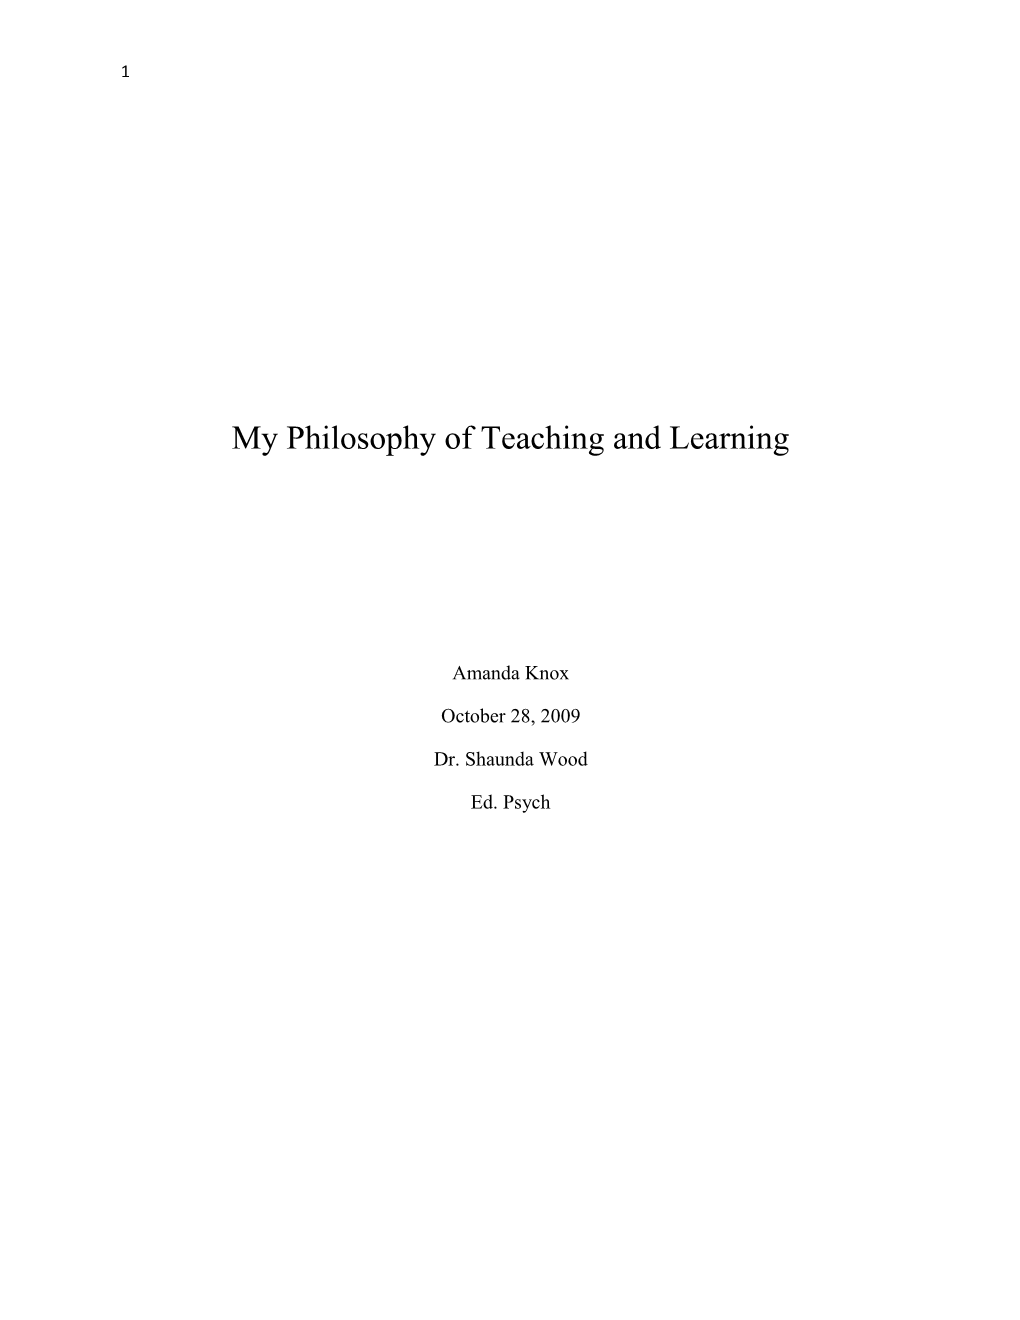 My Philosophy of Teaching and Learning